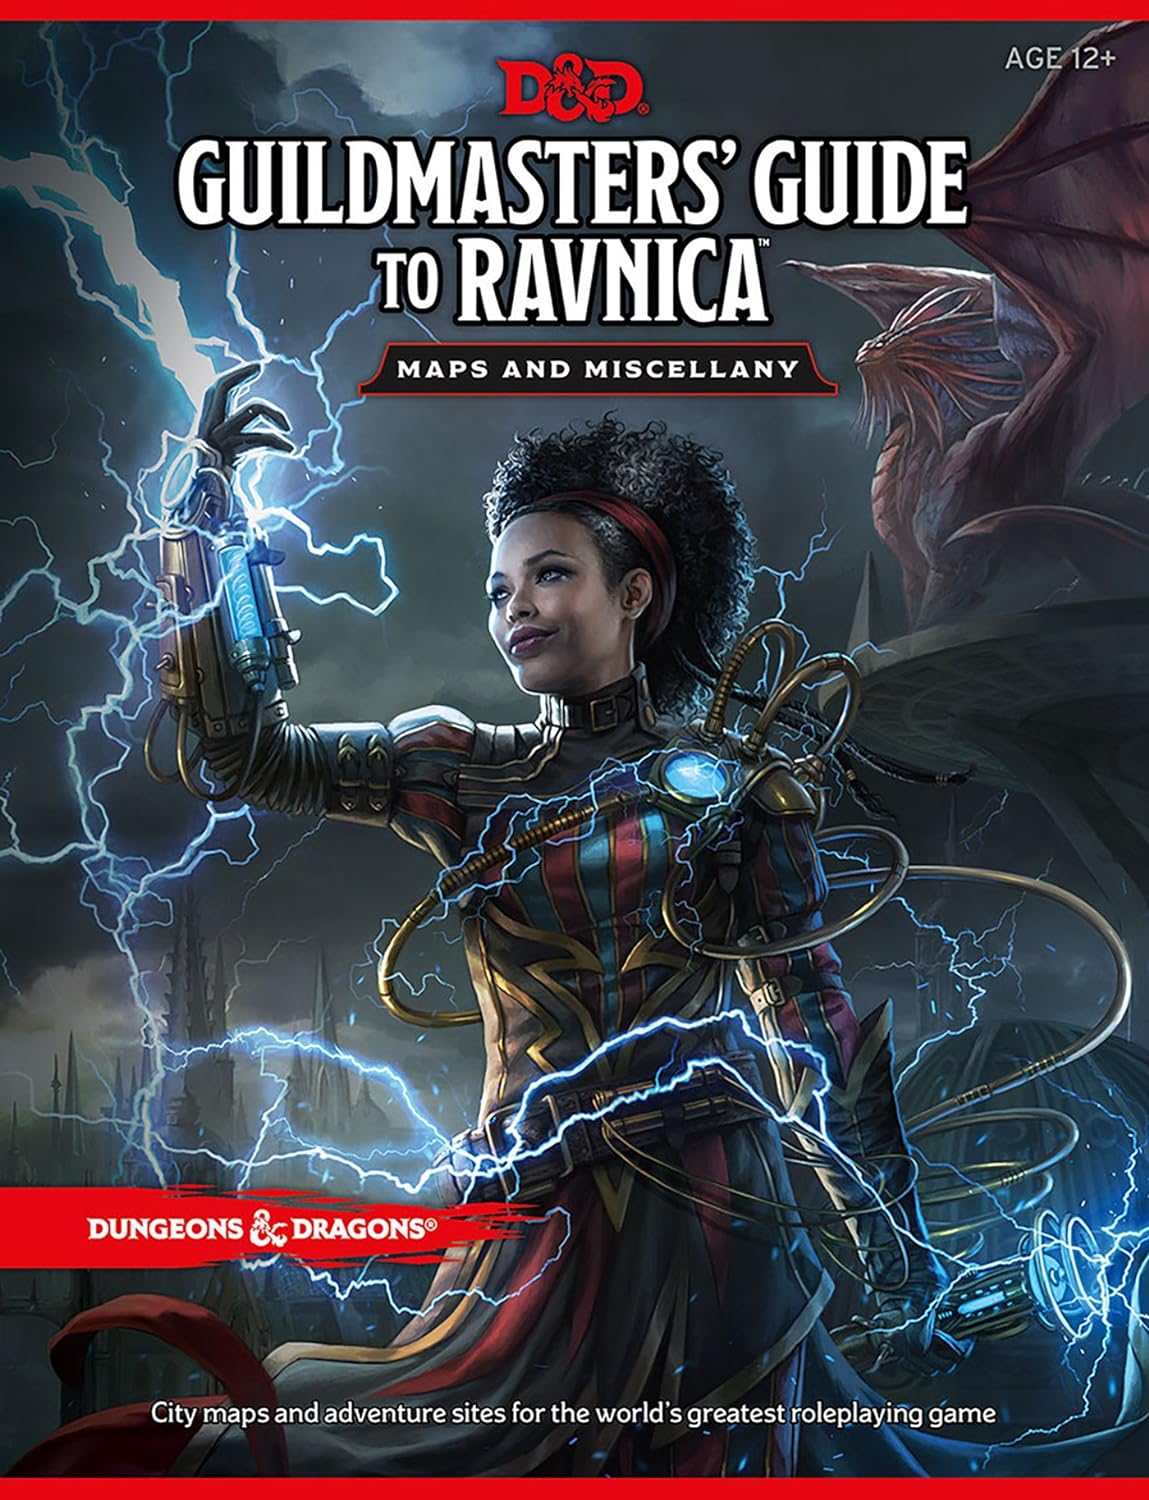 Dungeons & Dragons: Guildmasters' Guide to Ravnica - Maps and Miscellany - Bards & Cards